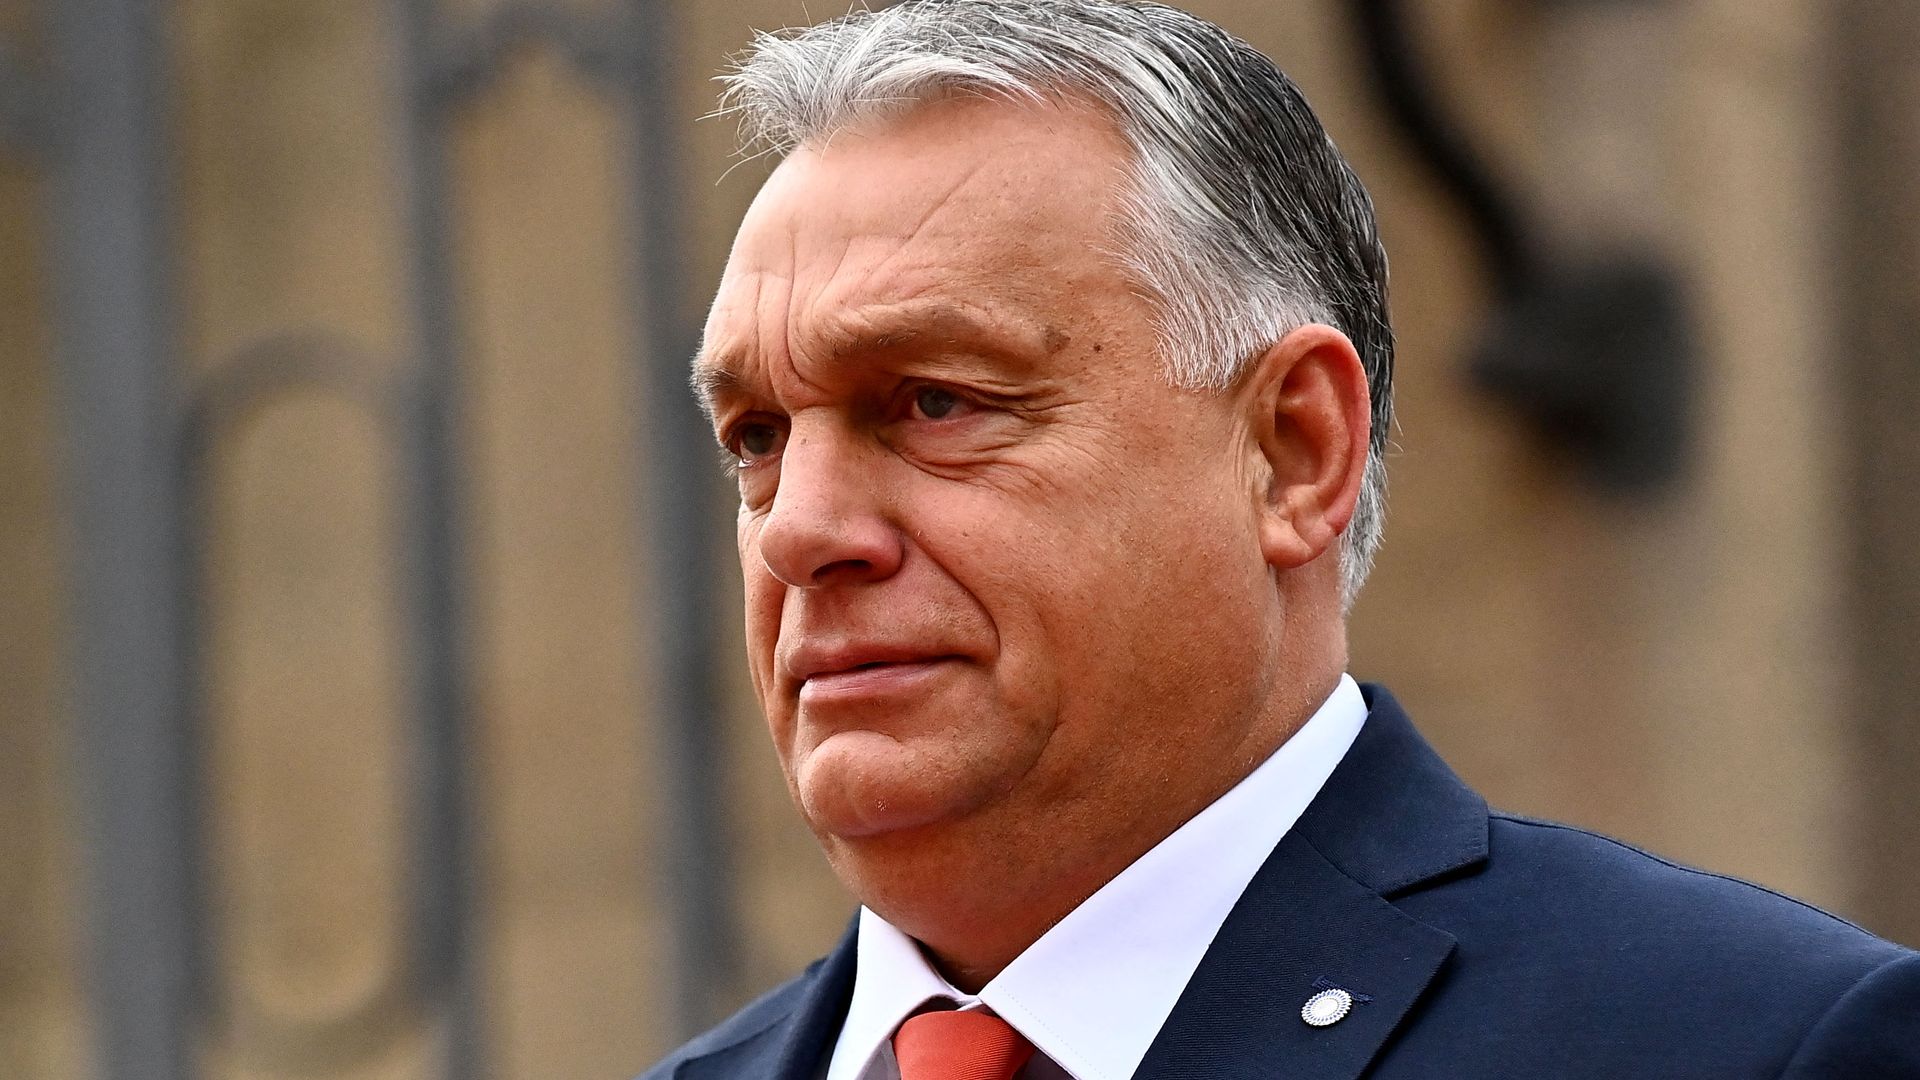 Hungary might be pursuing a policy of imperial resurgence by obstructing support for Ukraine and even seizing some Ukrainian land for itself.